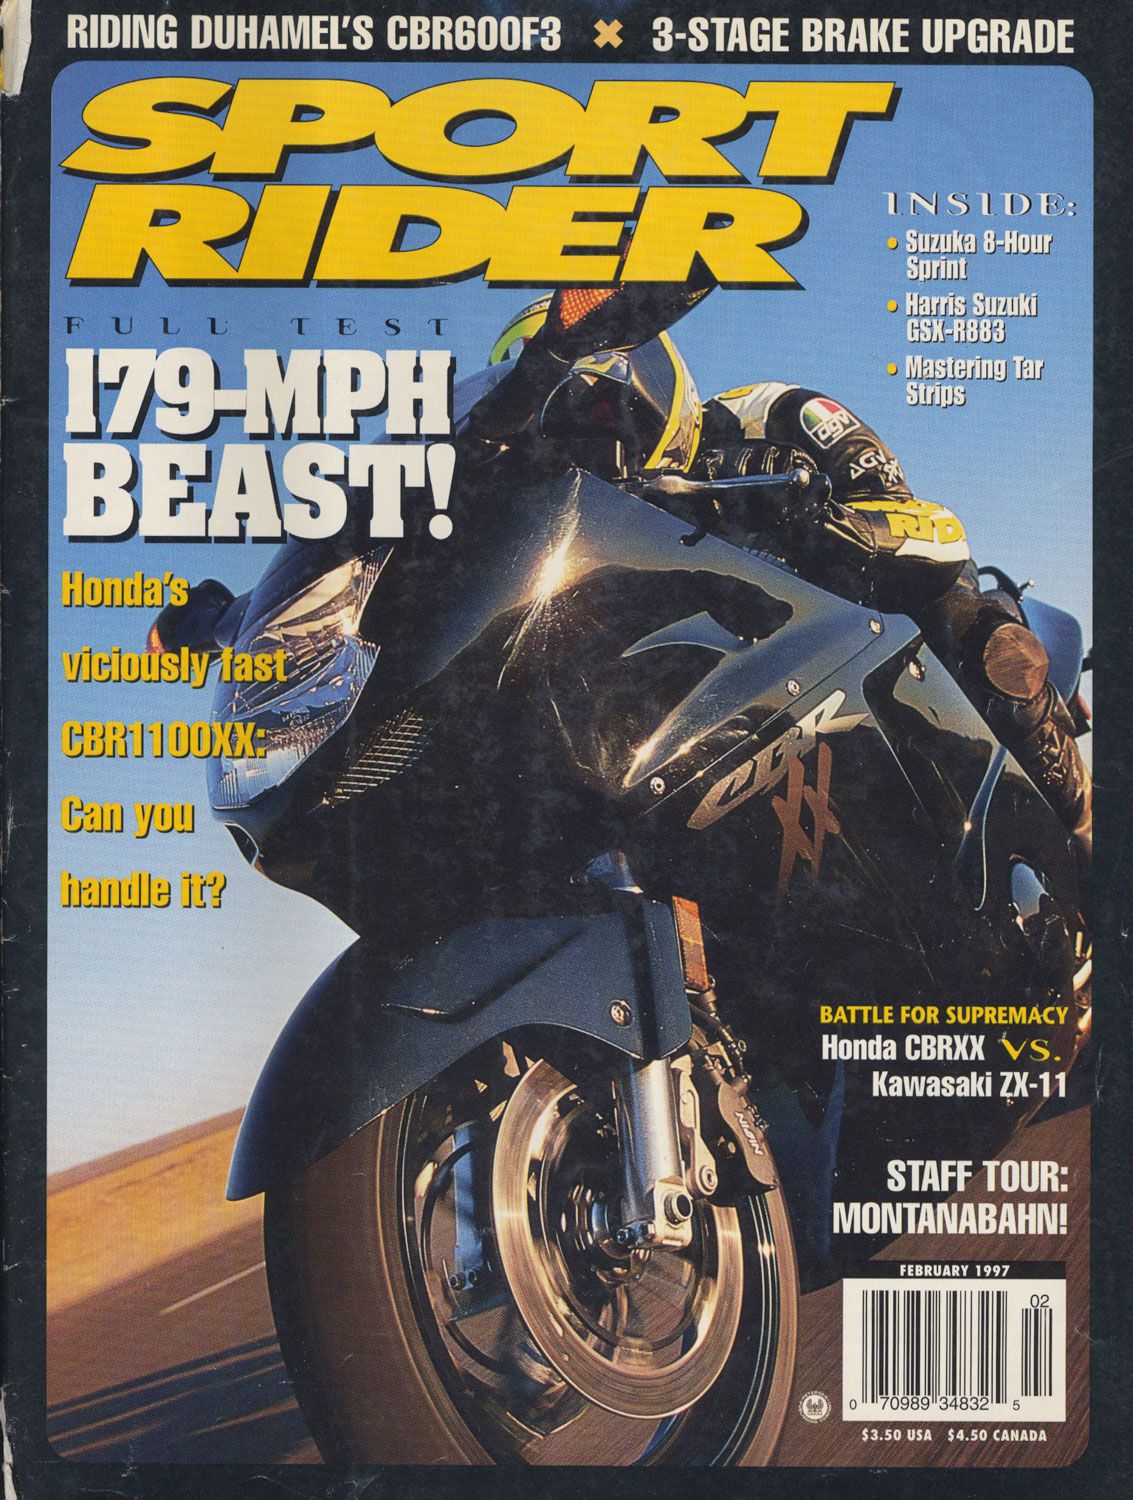 Sport Rider Covers From 1997 | Cycle World